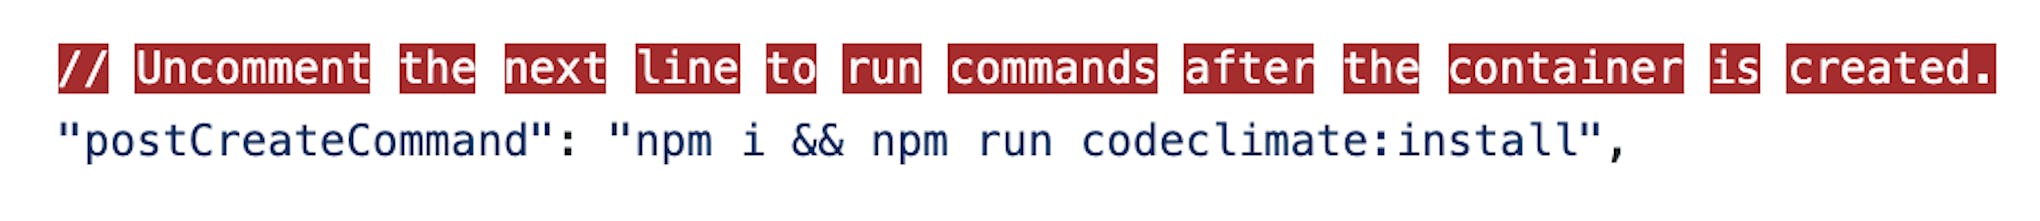 Use the PostCreateCommand Key to Execute commands on the already Running VsCode Container.